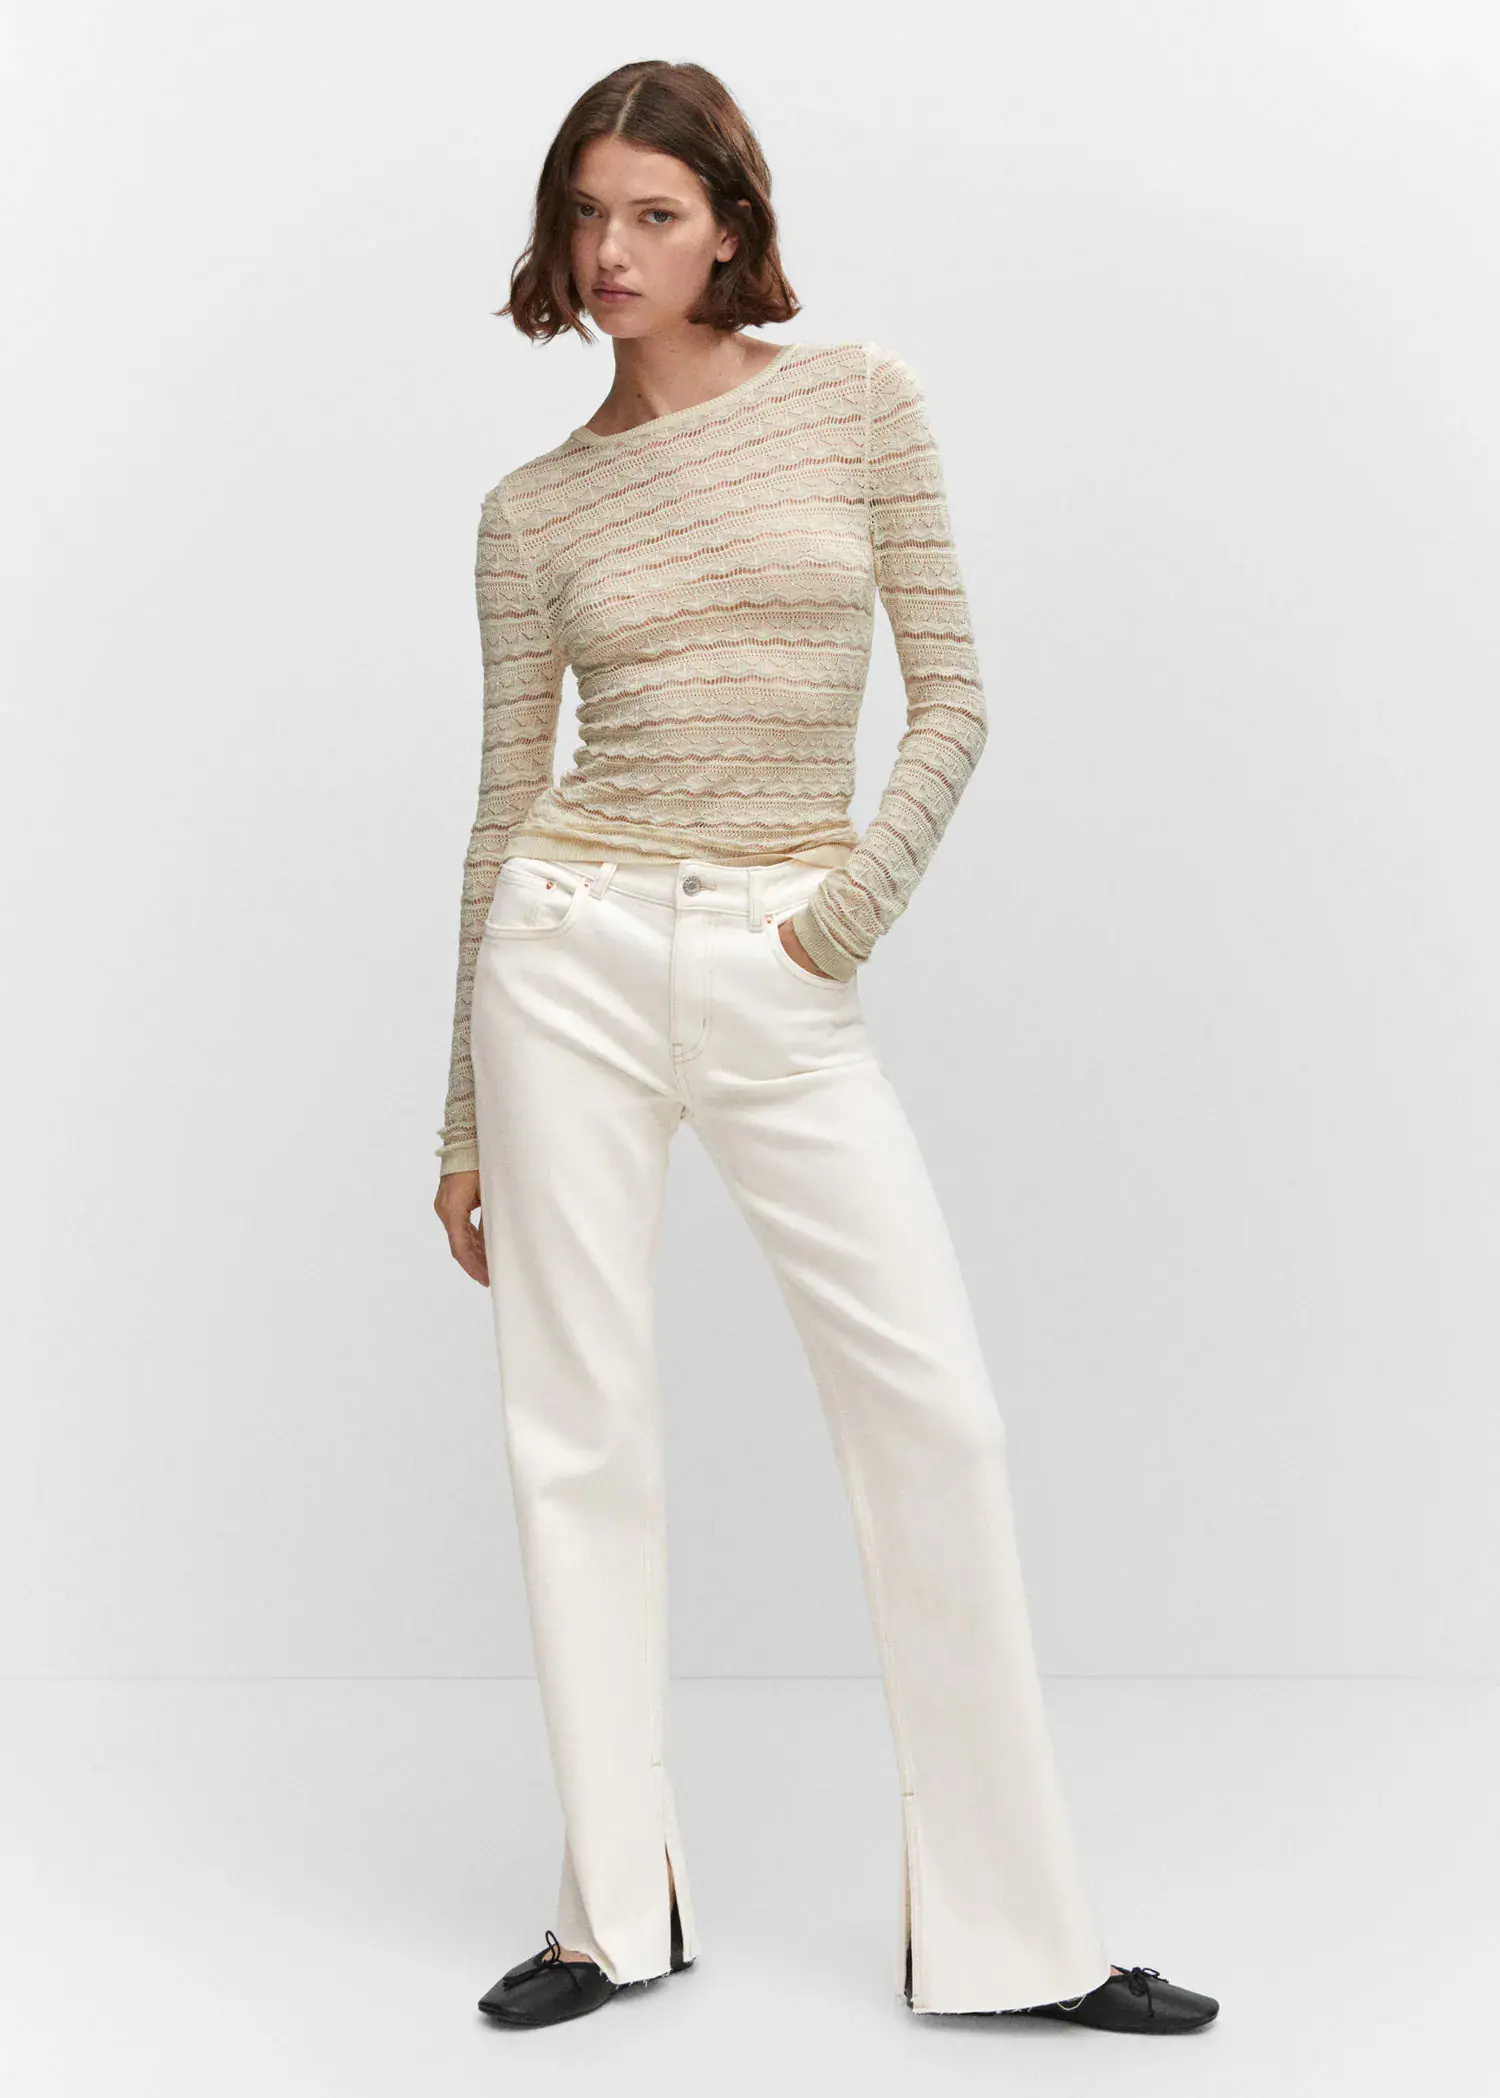 Mango Medium-rise straight jeans with slits. a woman wearing white jeans and a long sleeved shirt. 